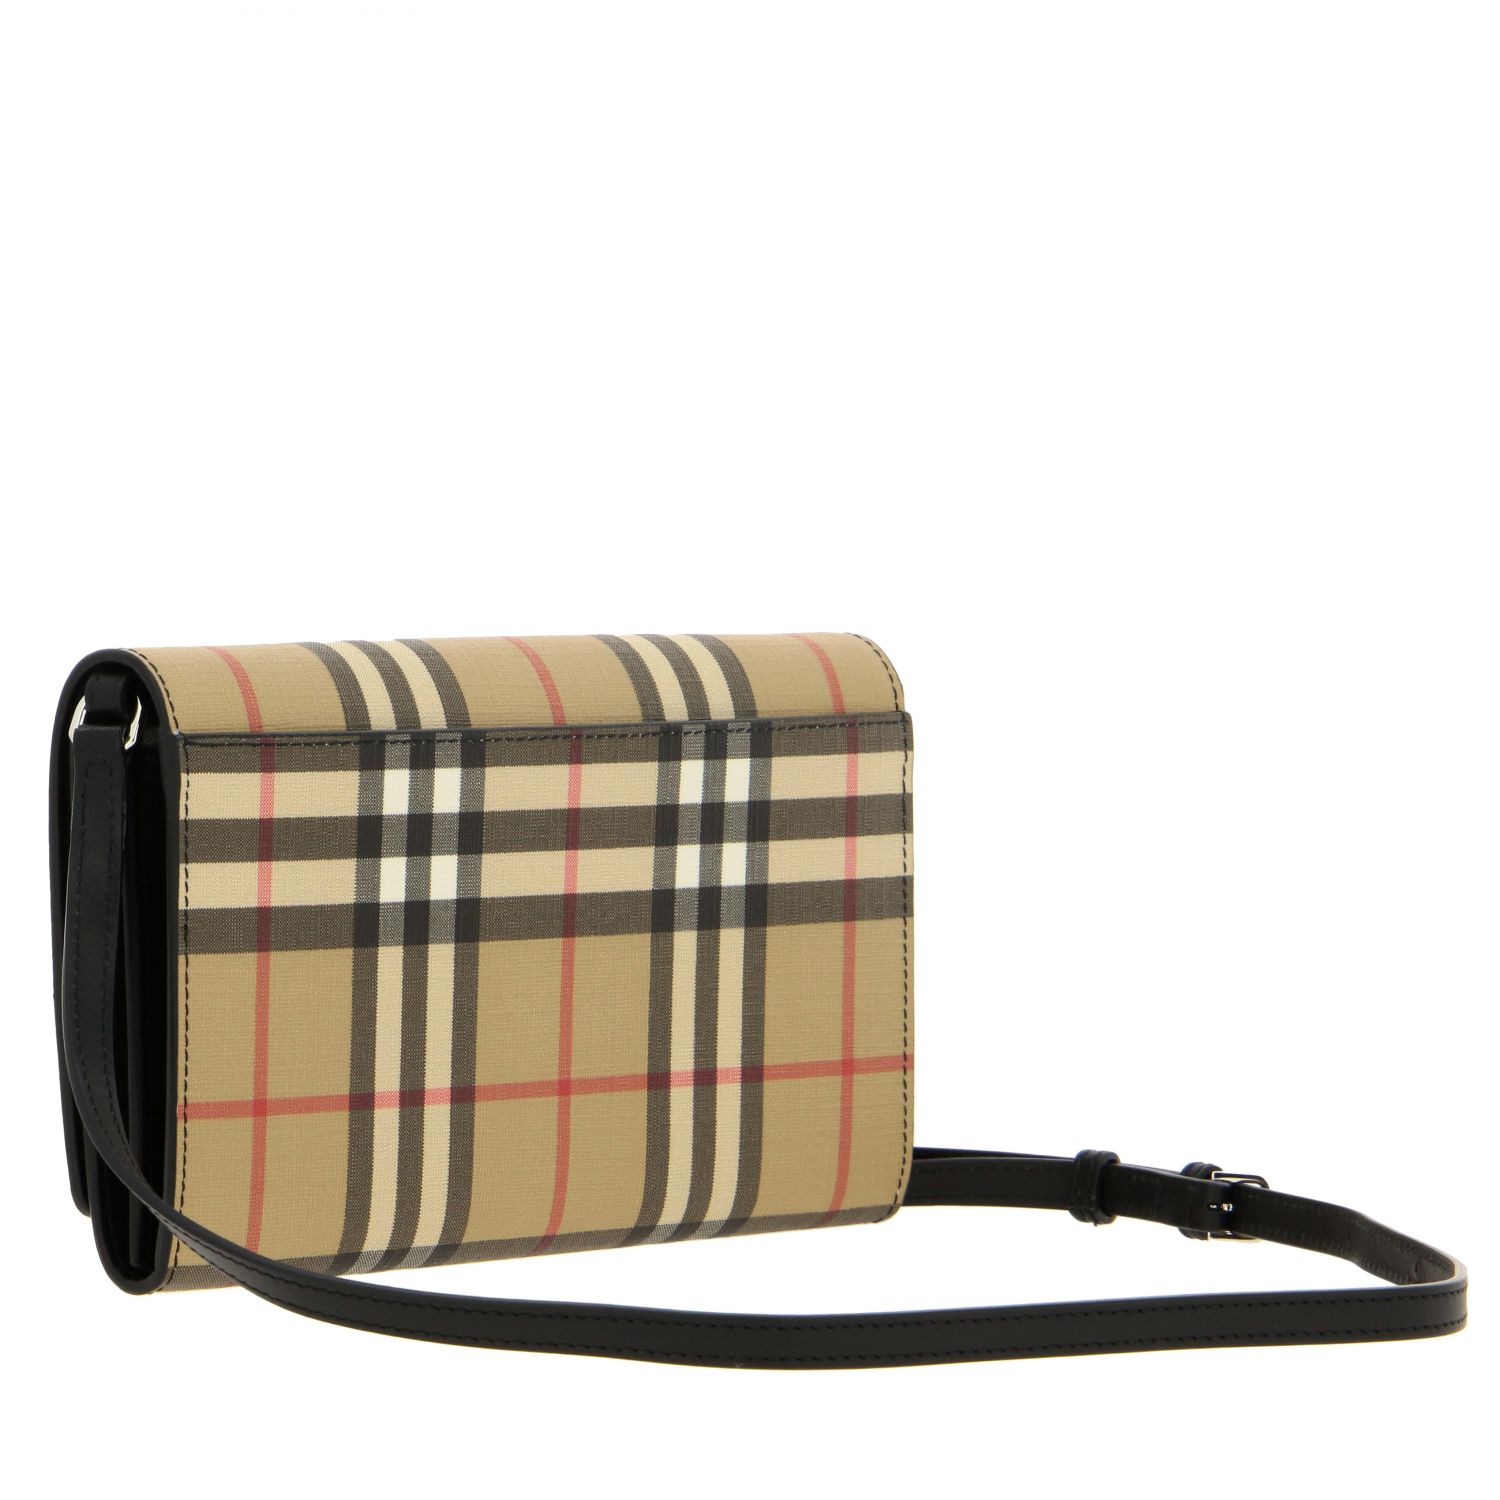 Burberry Hannah shoulder bag in check leather